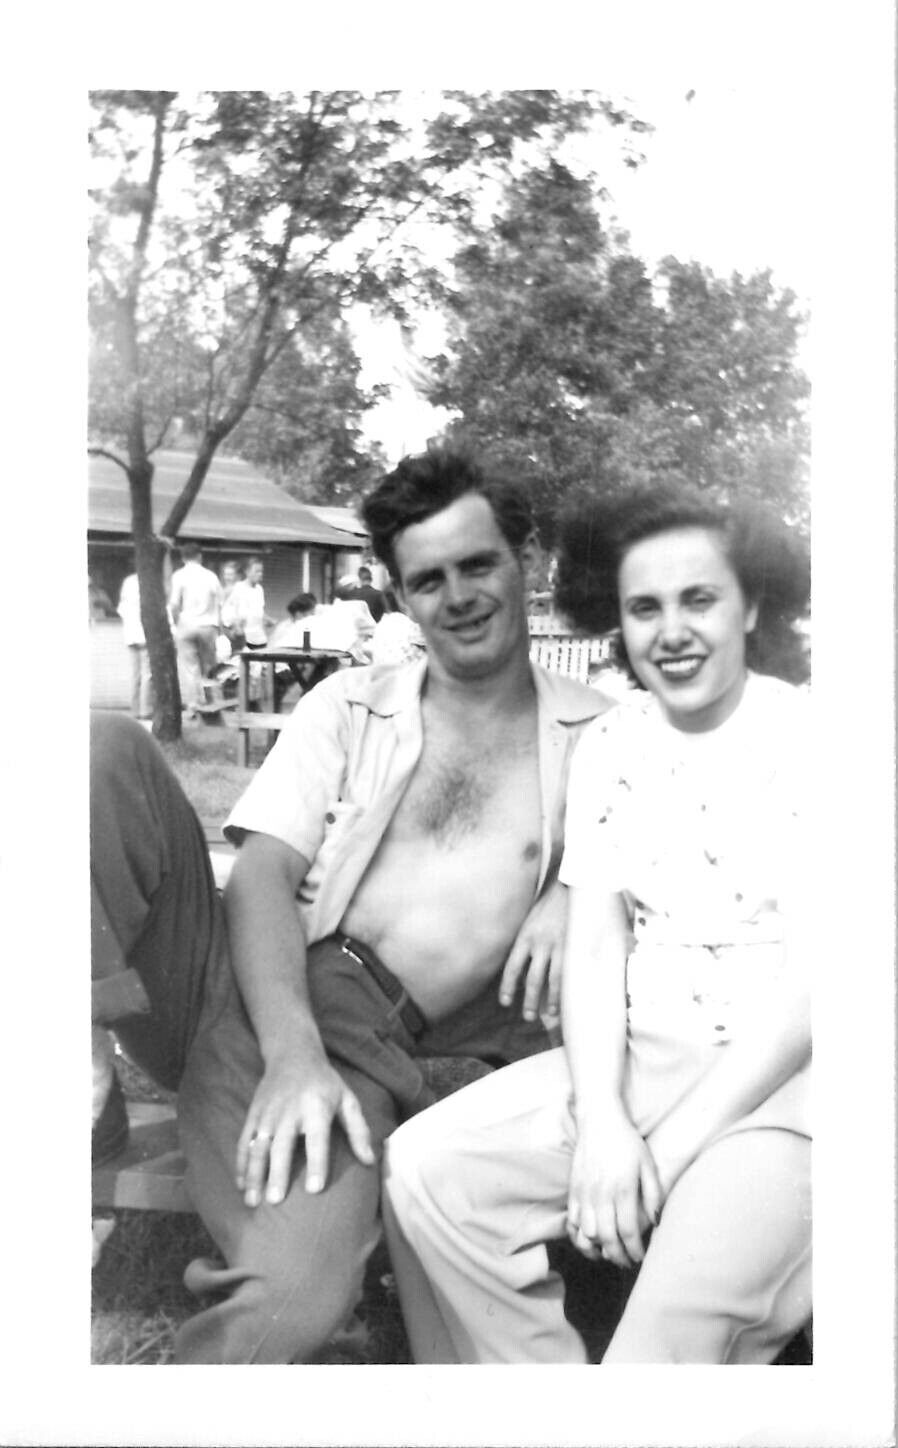 HAIRY CHESTED GAY MAN MANSPREADING NEXT TO FEMALE FRIEND ~ 1940s VINTAGE PHOTO